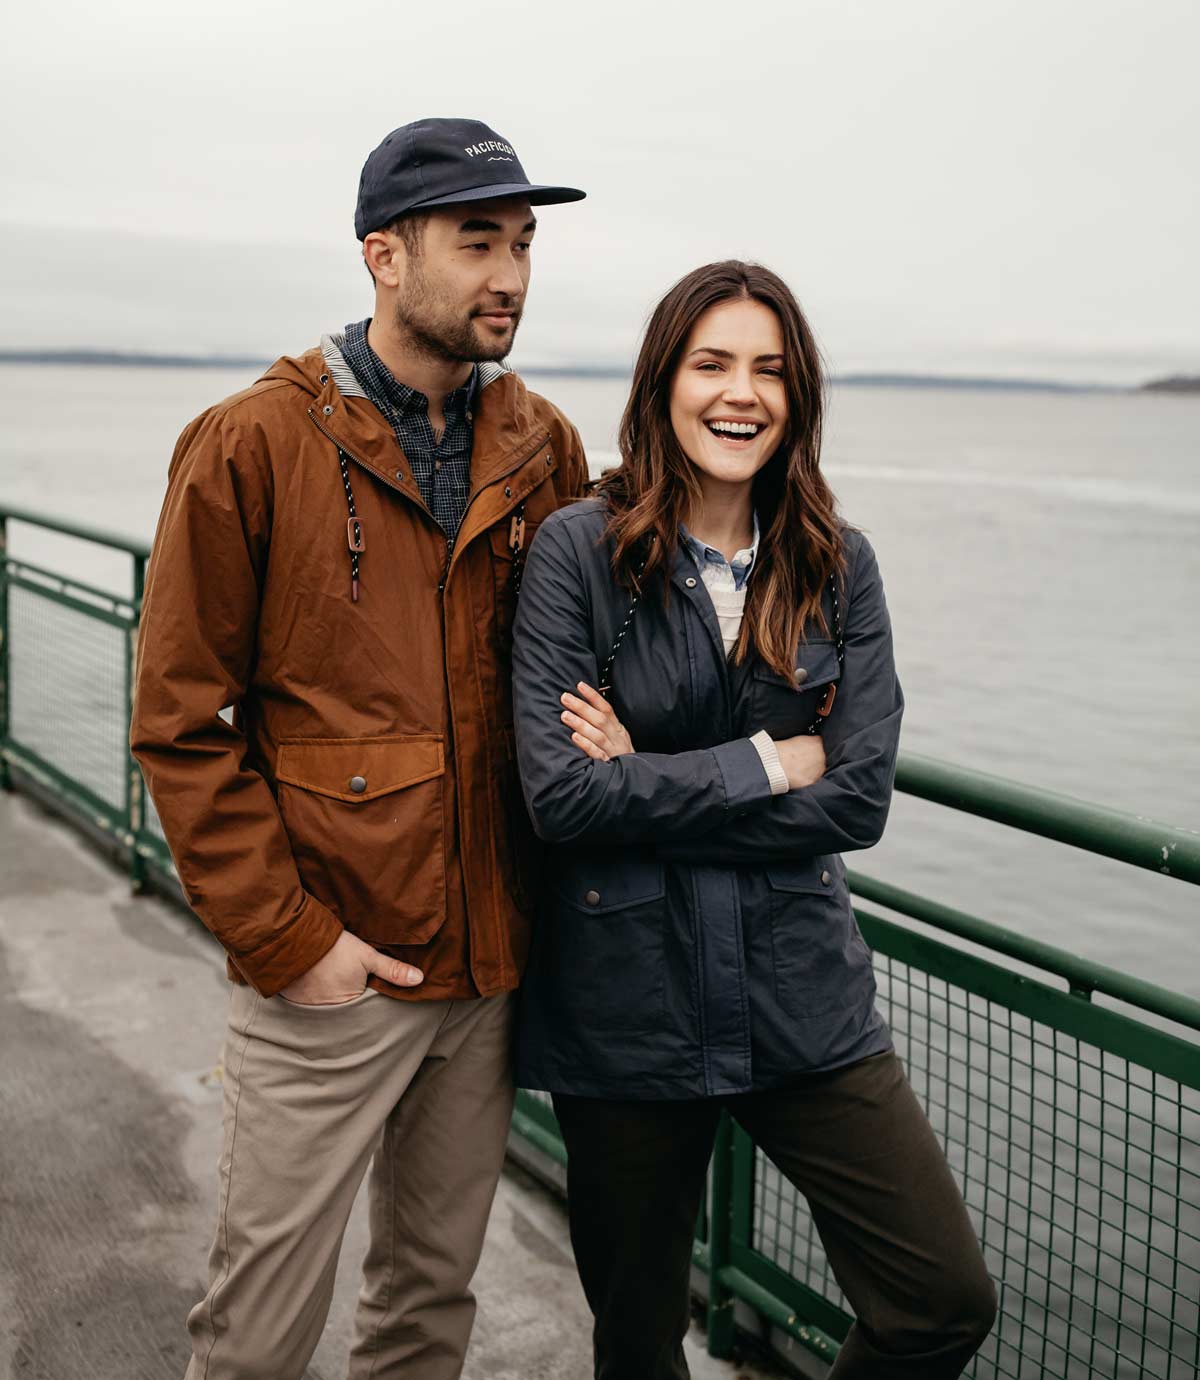 are barbour wax jackets warm